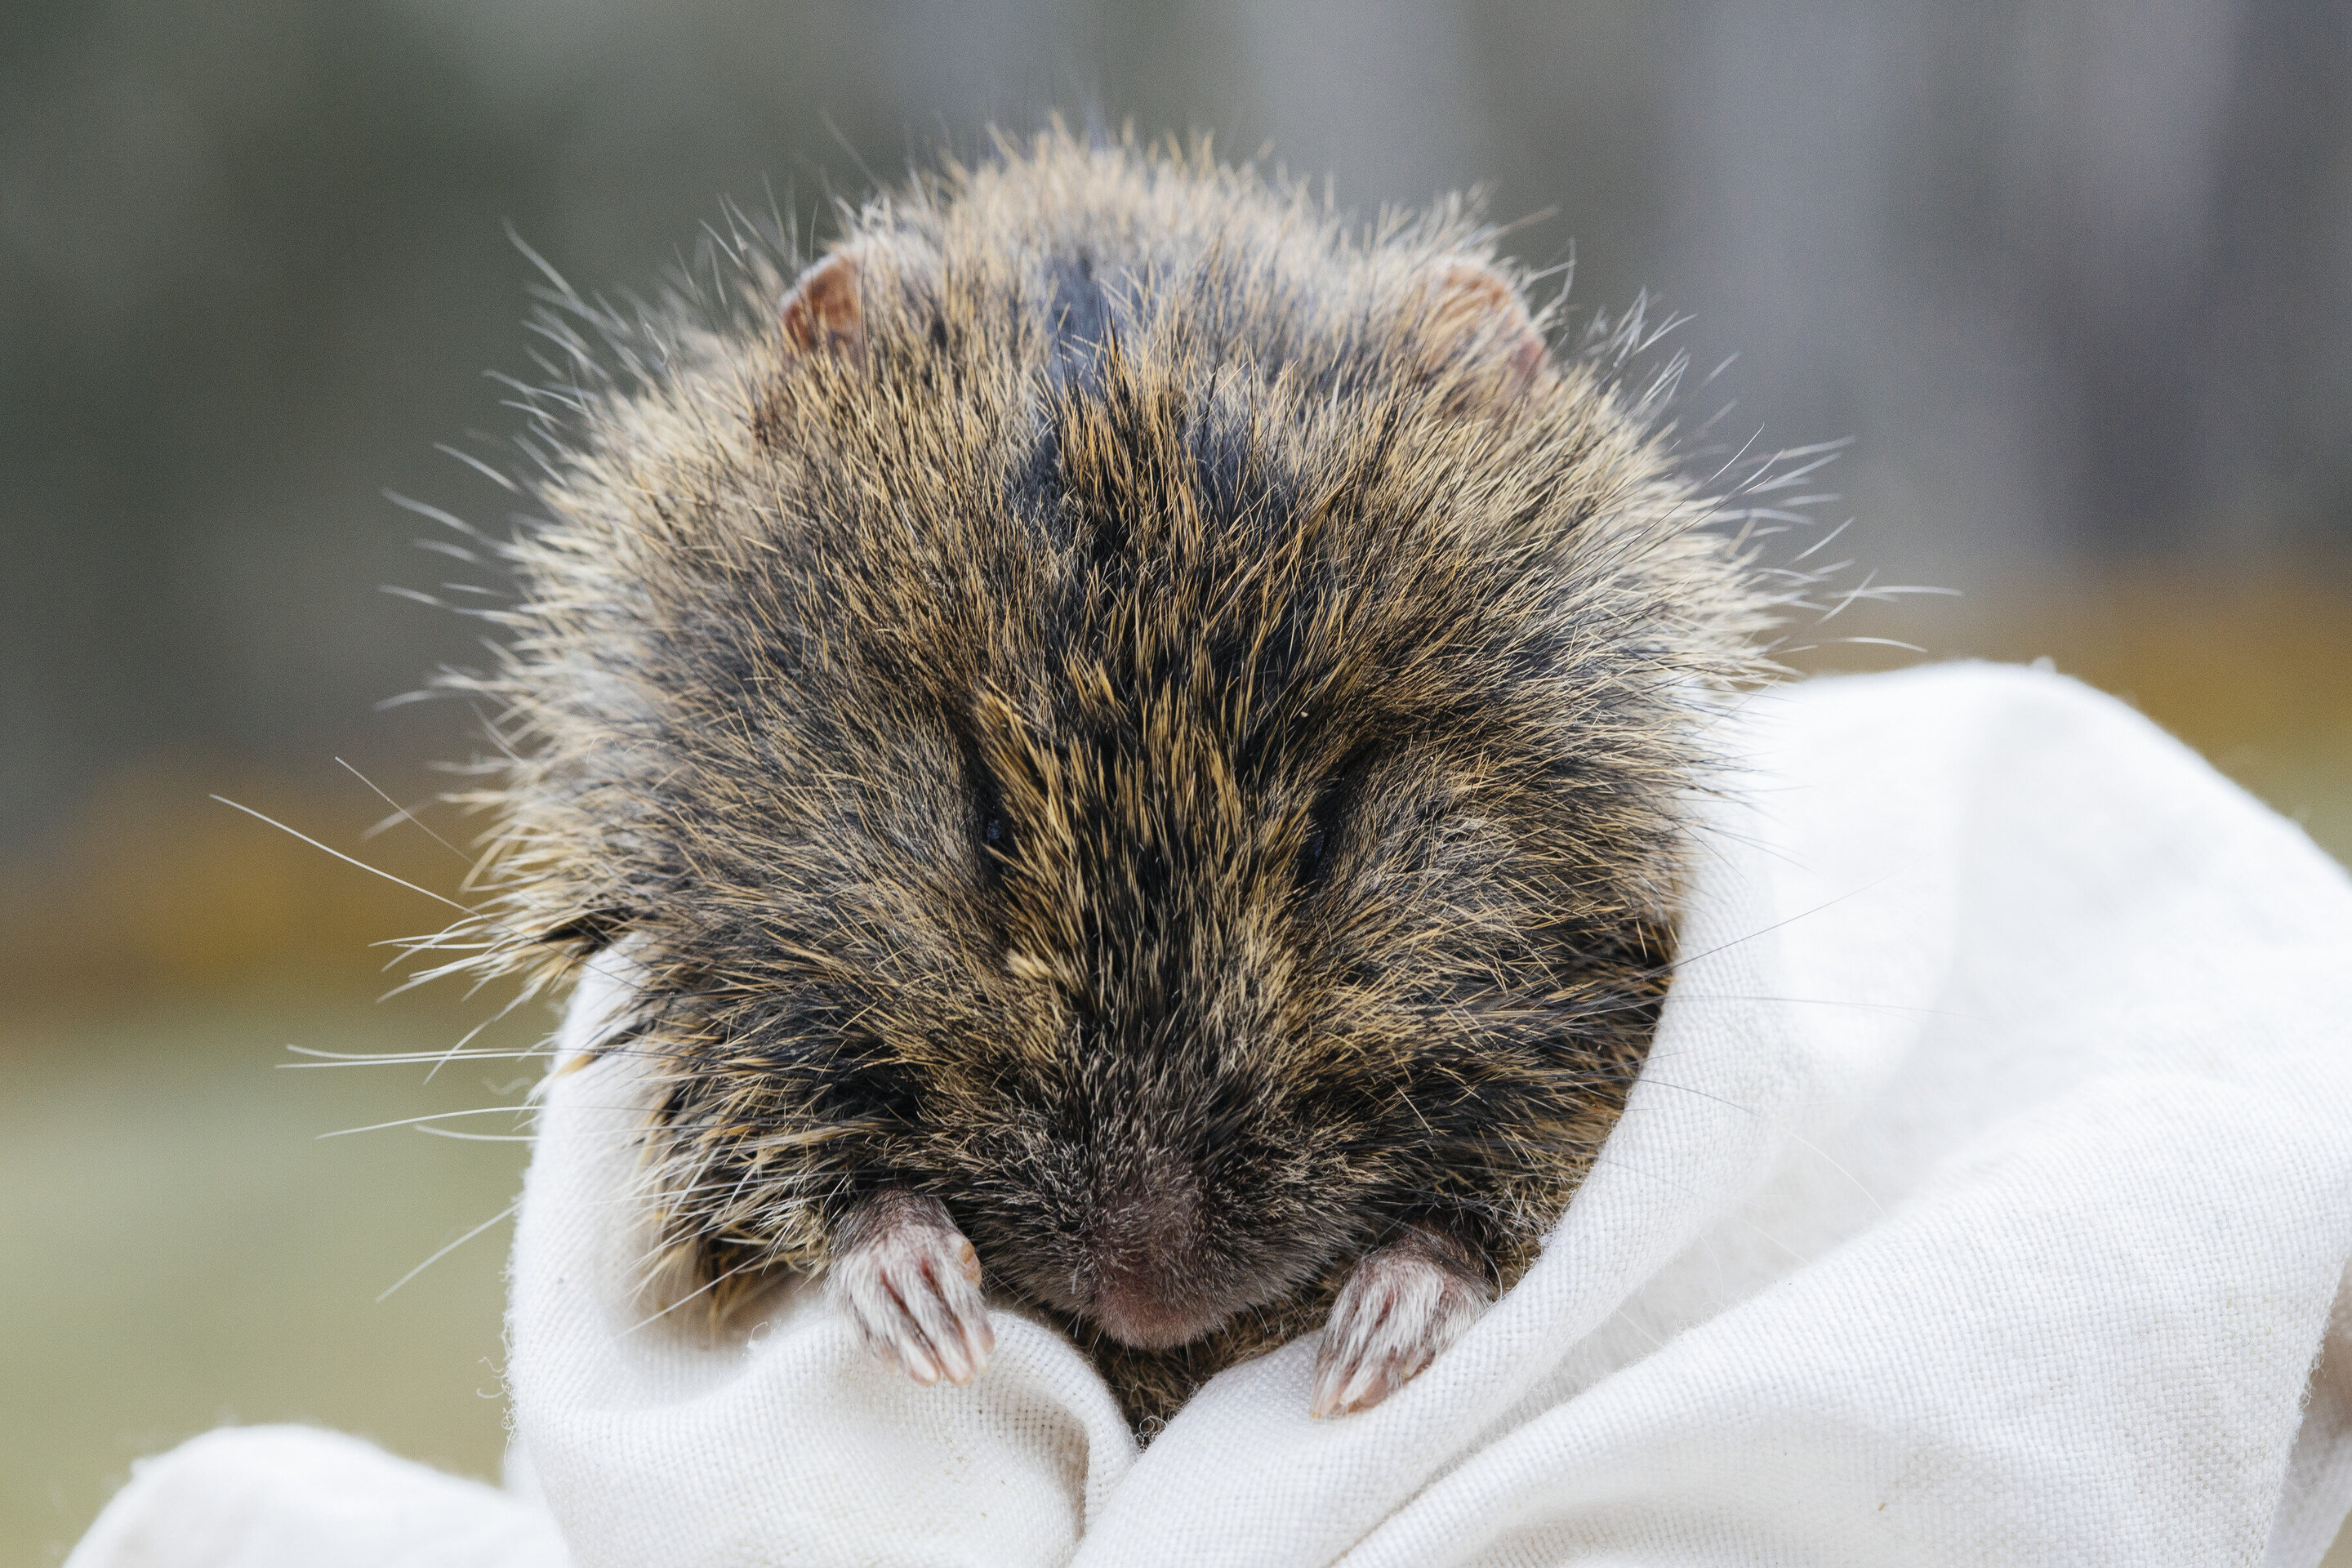 Bushfires and climate change threaten the future of native Australian rodent - Phys.Org